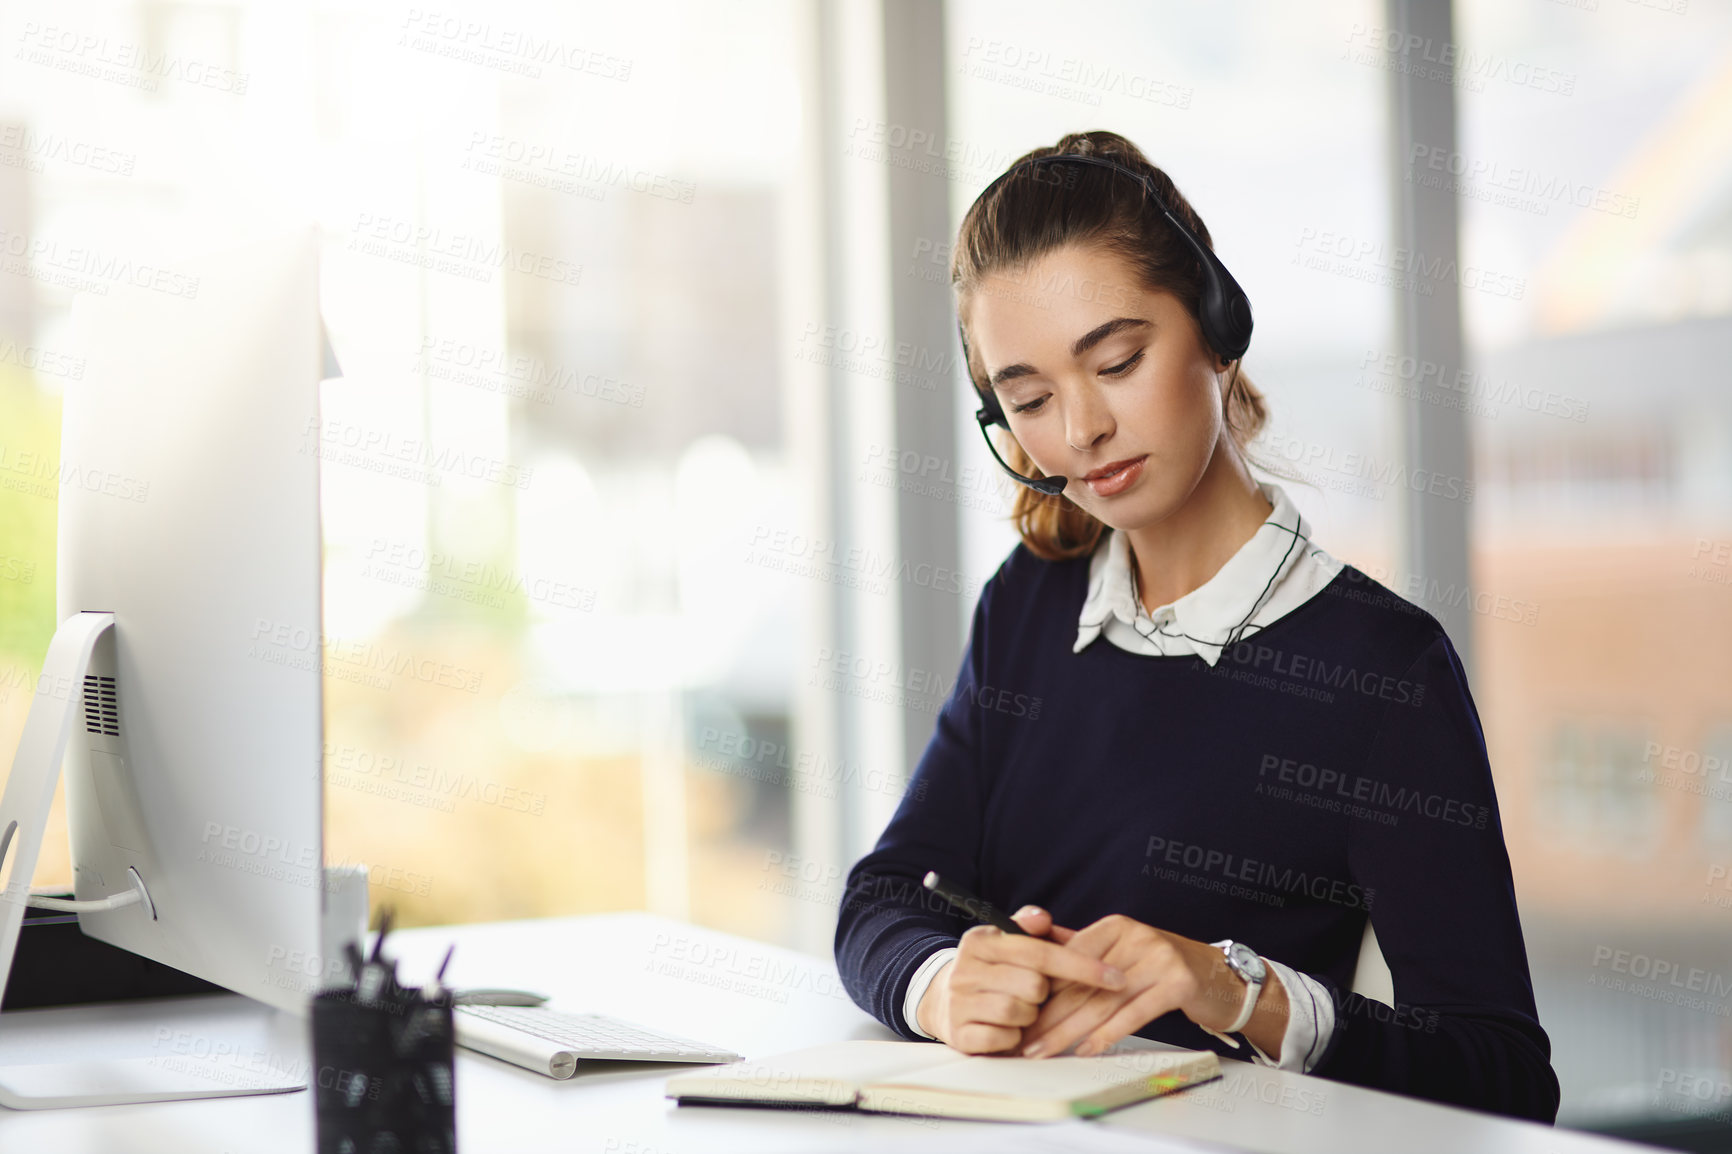 Buy stock photo Shot of an attractive young businesswoman wearing a headset and writing notes at her desk in a modern office